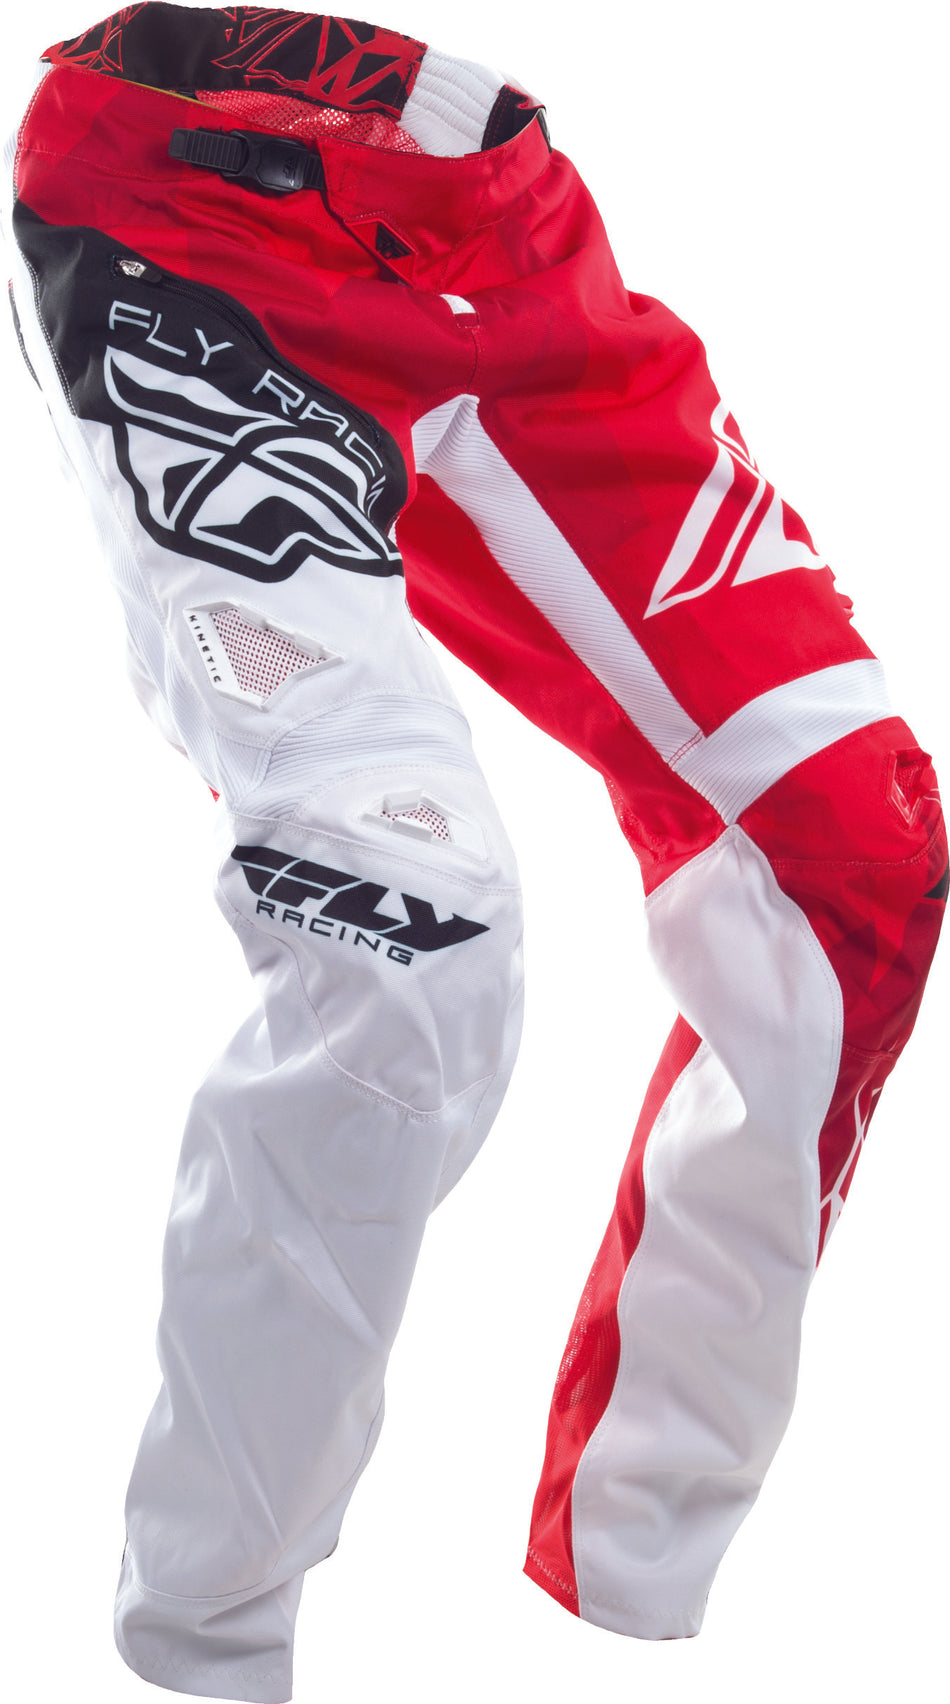 FLY RACING Bicycle Crux Pant Red/White Sz 32 370-02232